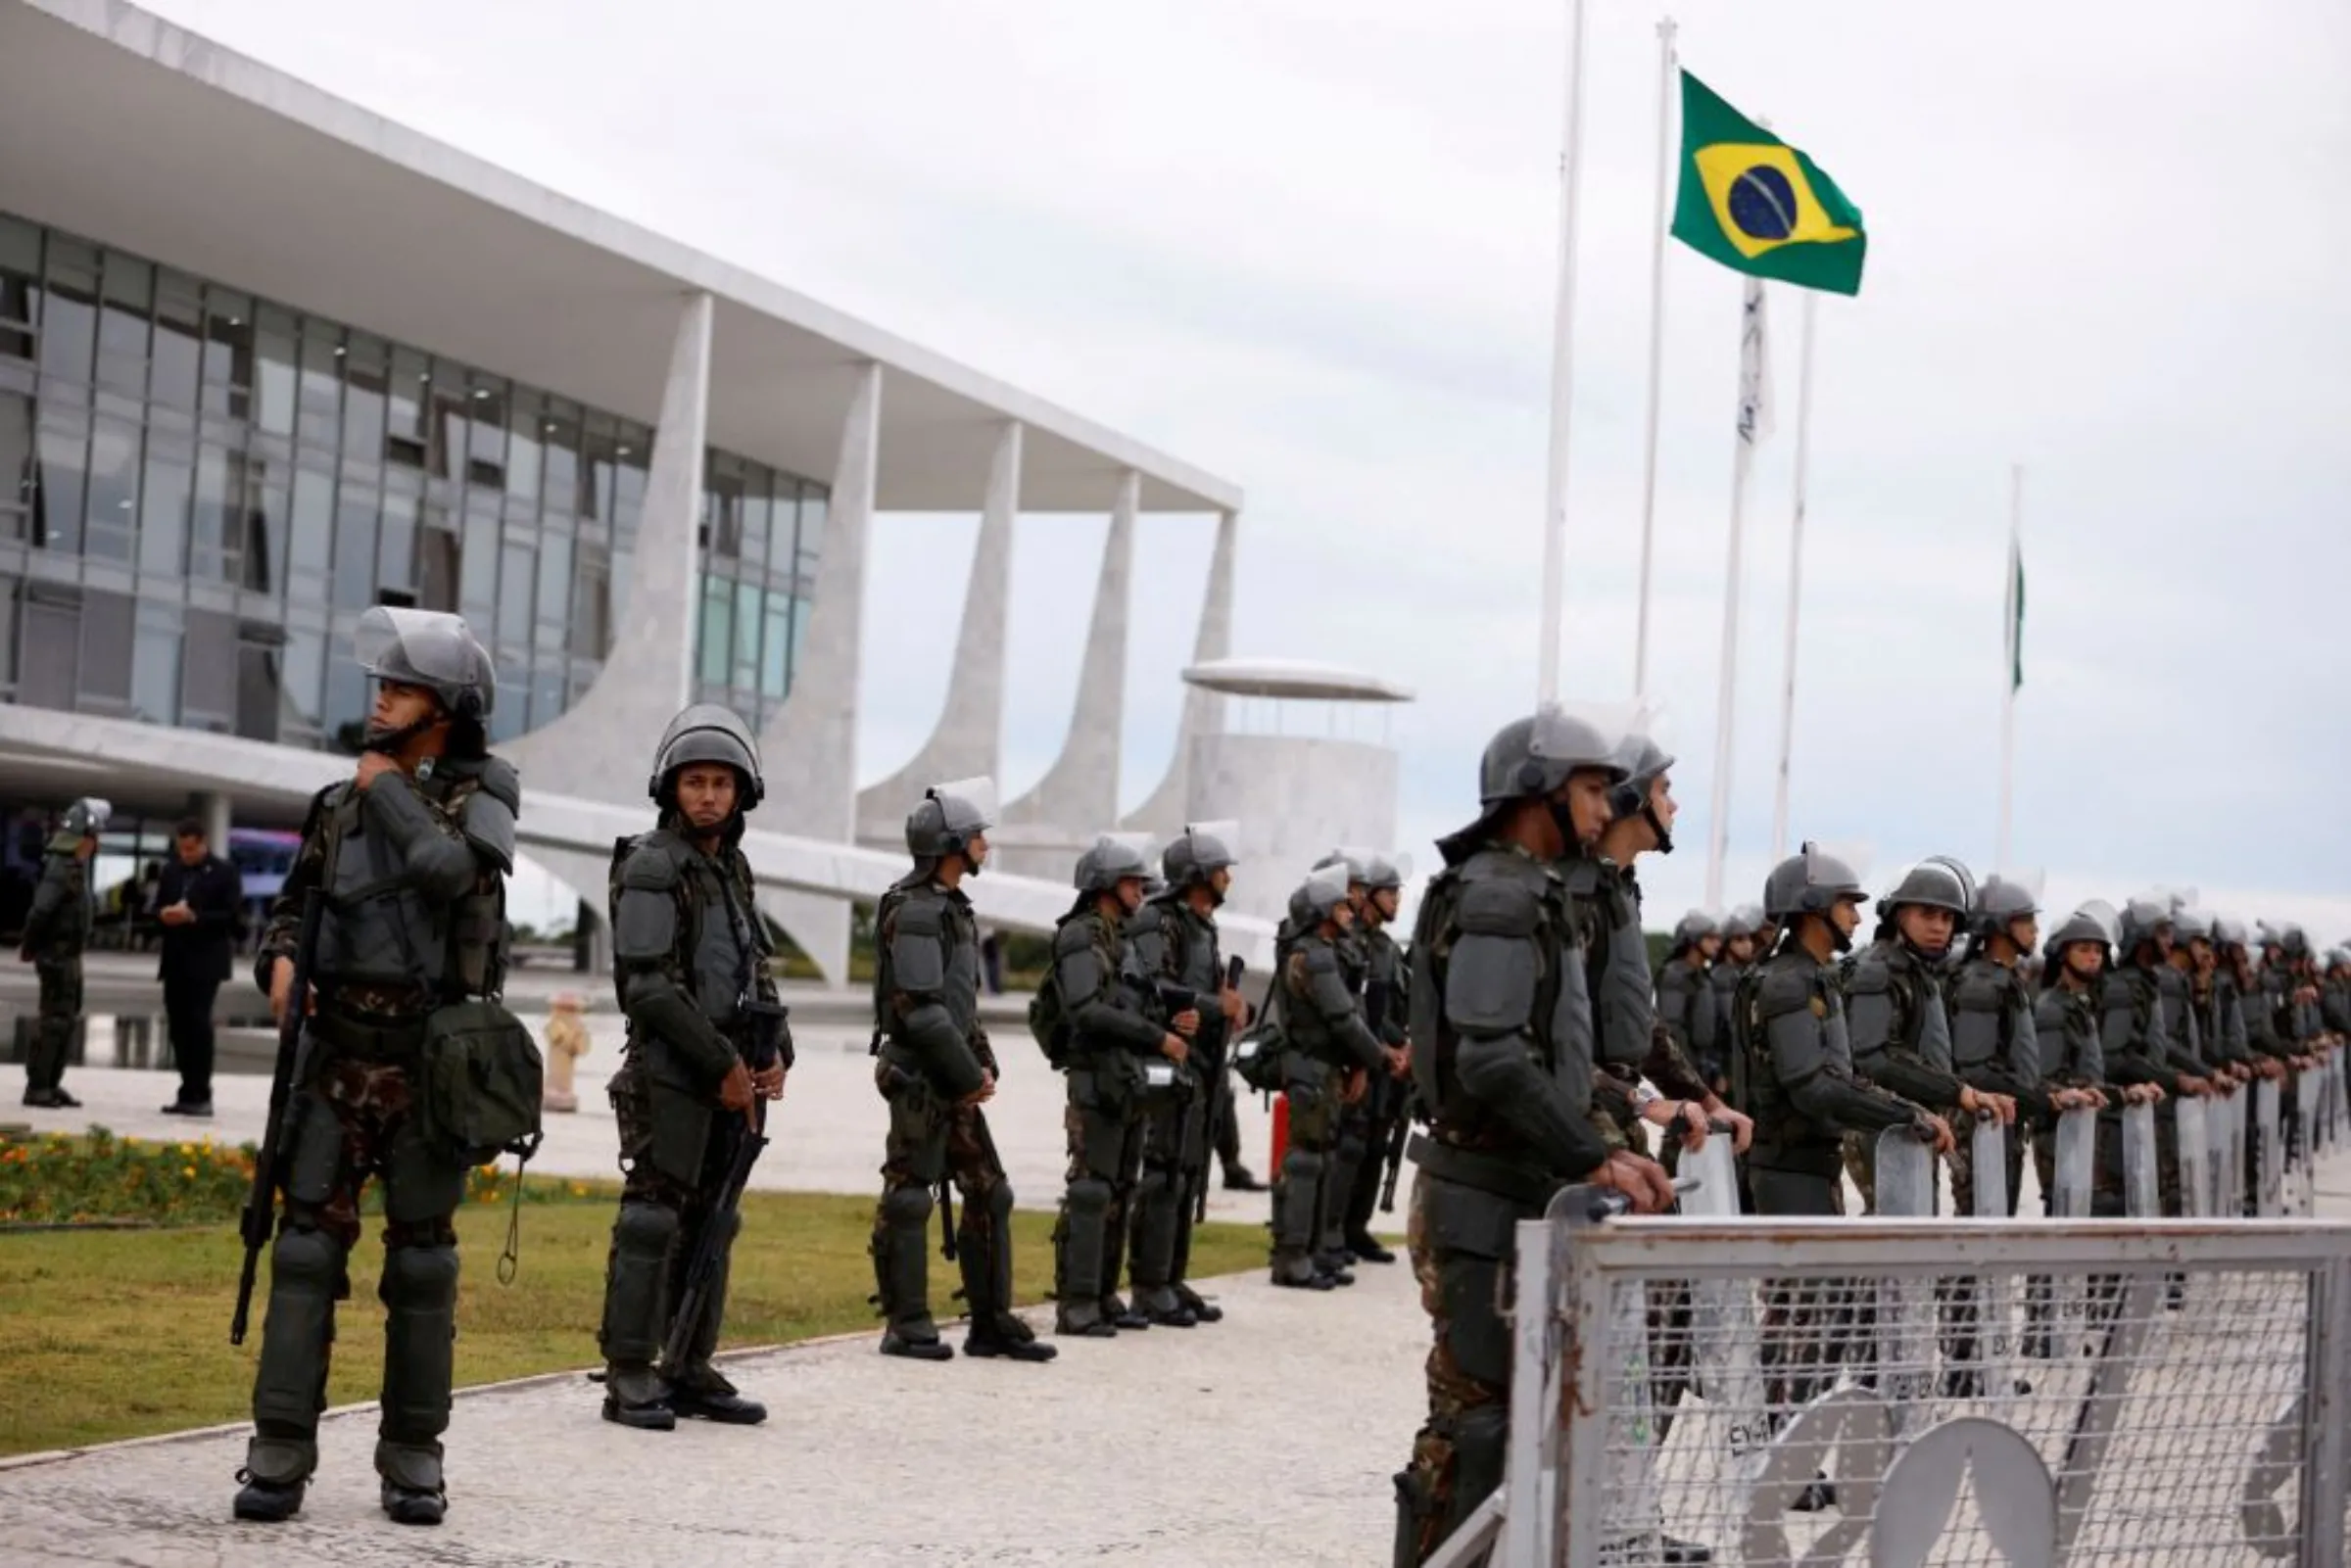 Army officers stand guard outside the Planalto Palace, in Brasilia, Brazil January 11, 2023. REUTERS/Amanda Perobelli